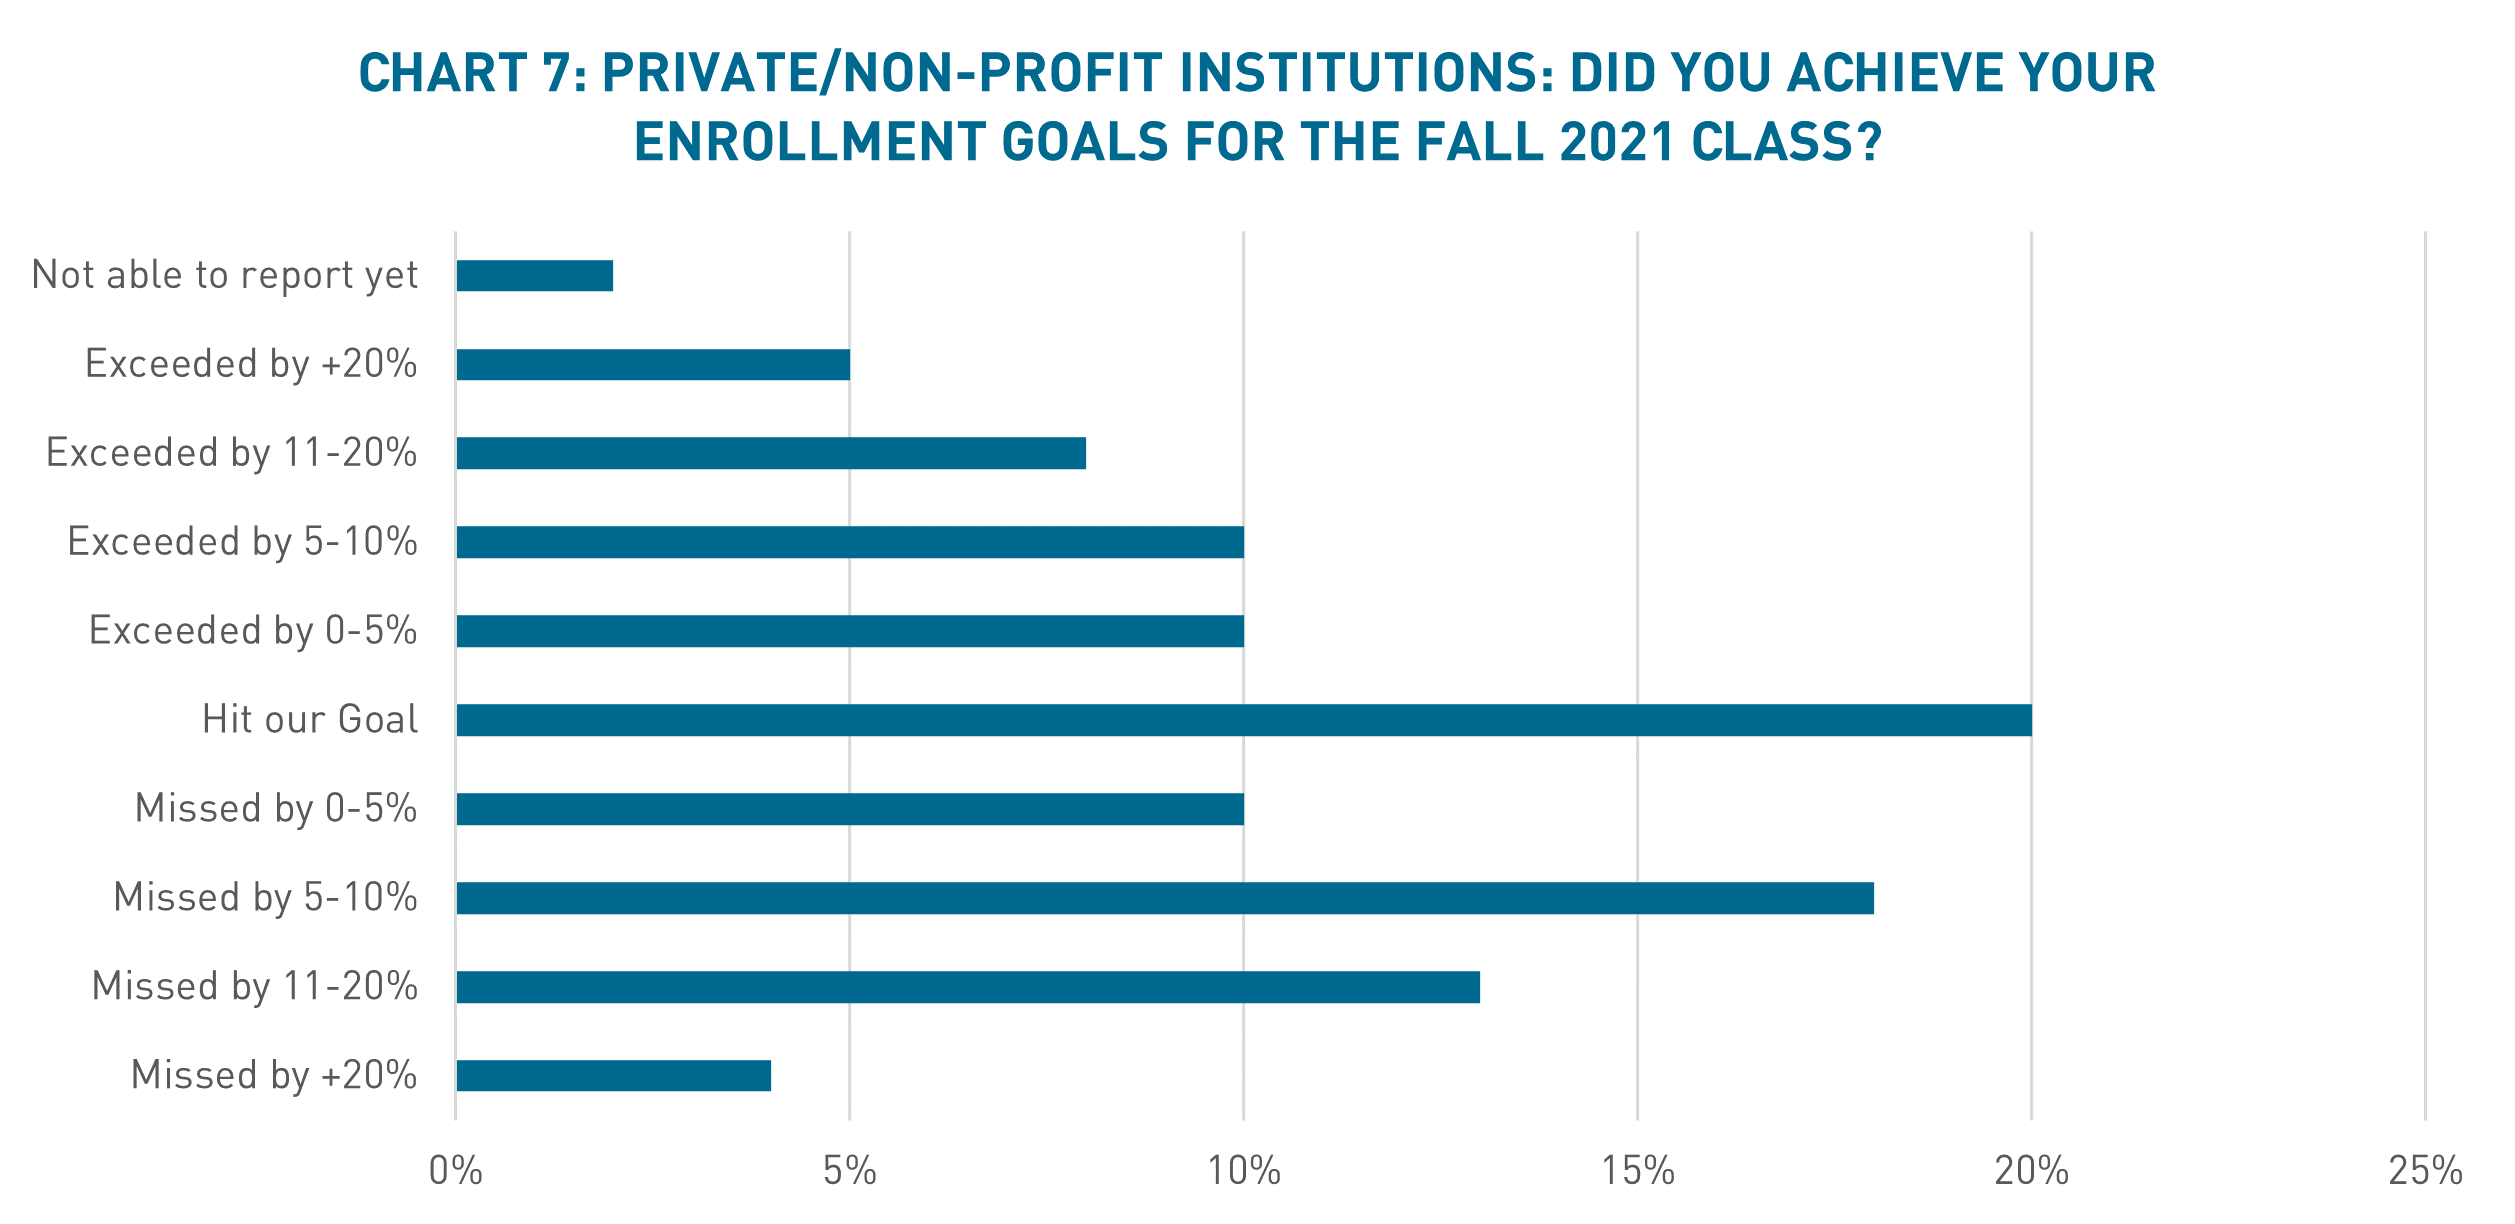 Chart shows private colleges and their alignment with enrollment goals